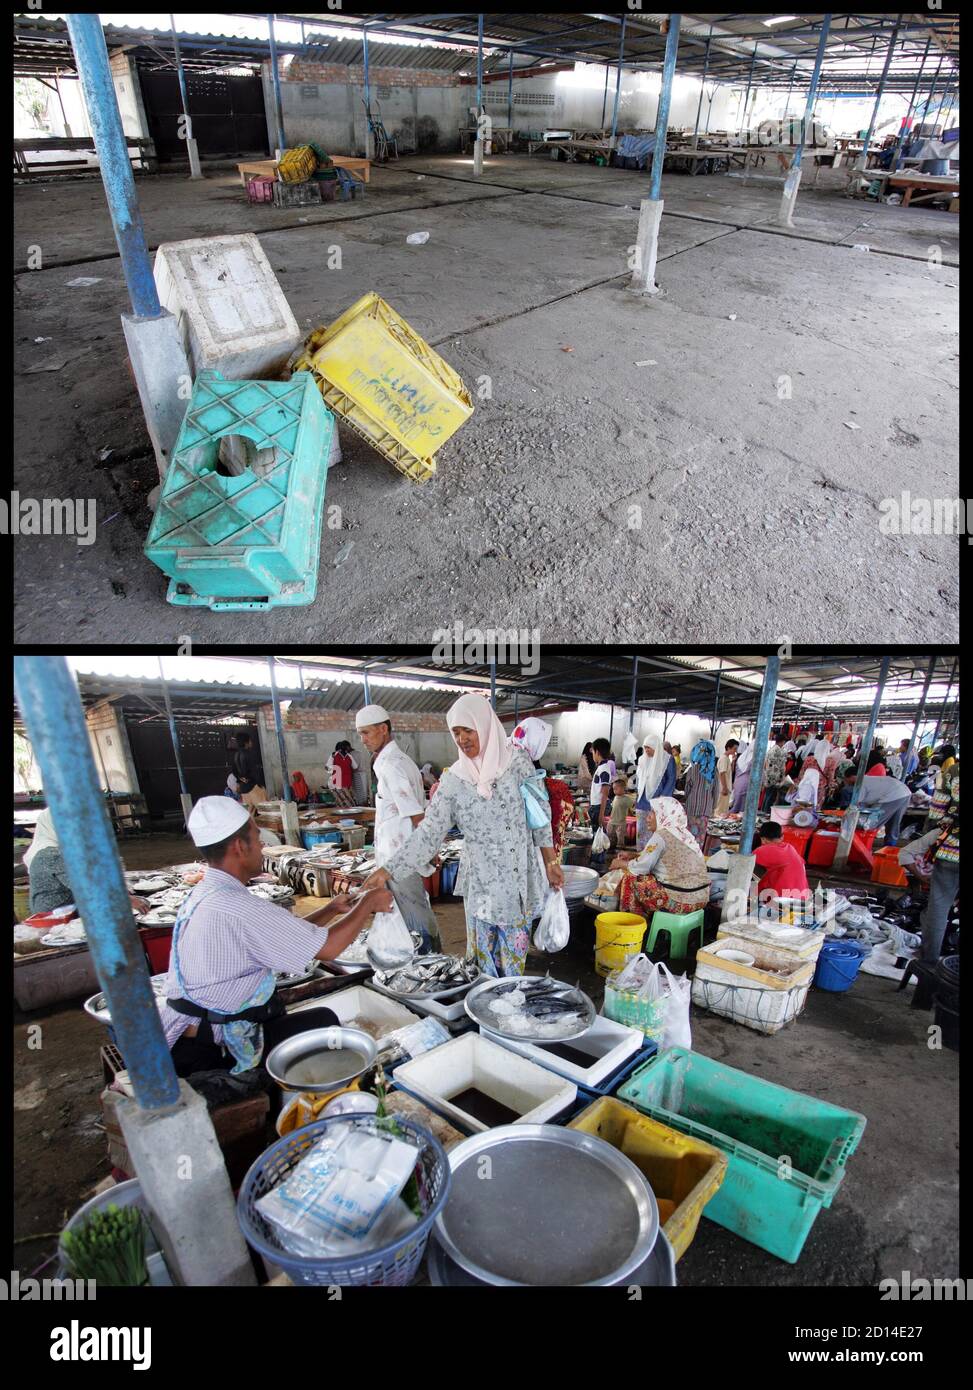 Combination photograph shows scenes of trading activities on two different days in market in Thailand's southern province of Pattani.  A combination photograph shows contrasting scenes of trading activities in a market in Thailand's southern province of Pattani on August 24, 2005 and August 26, 2005 (top). Rows of shuttered kiosks on Friday in the central market in Pattani suggest people are still scared of militants' threats to Muslim traders not to open up on the Islamic holy day despite government assurances they have nothing to fear. REUTERS/Bazuki Muhammad Stock Photo